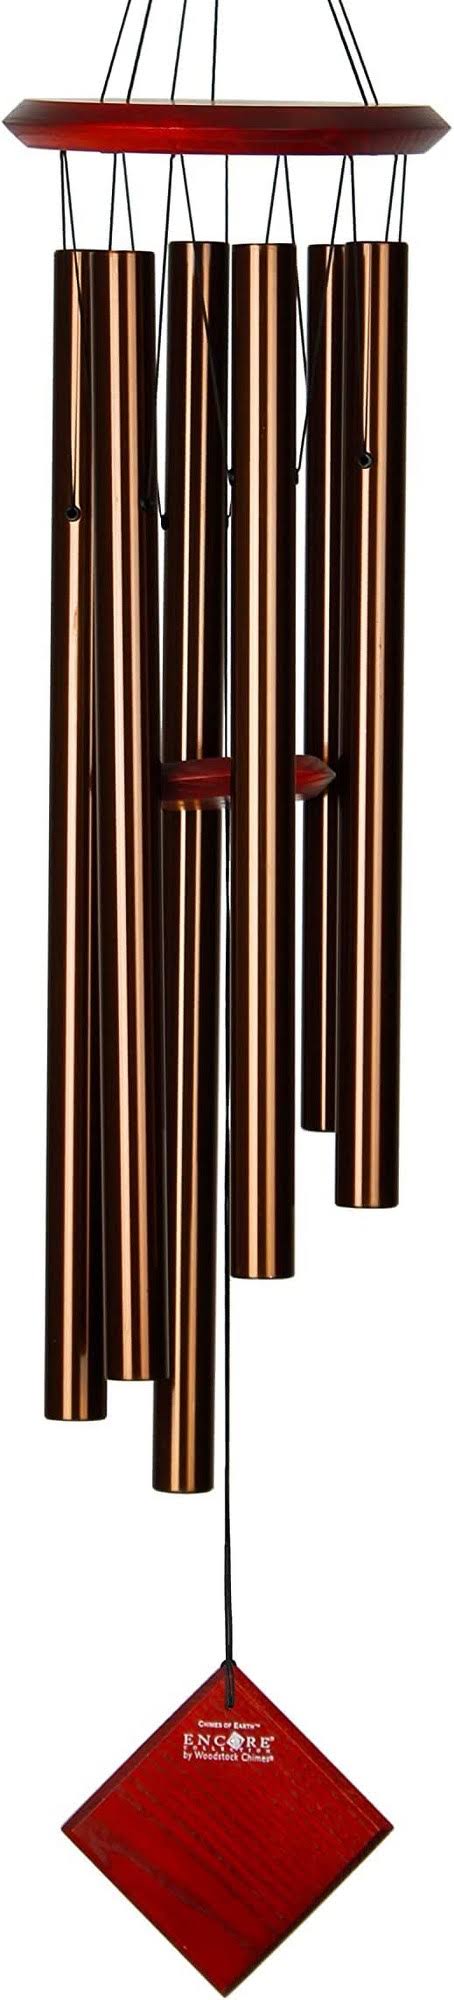 Woodstock Encore Collection Windchime - Bronze, Chimes of Earth